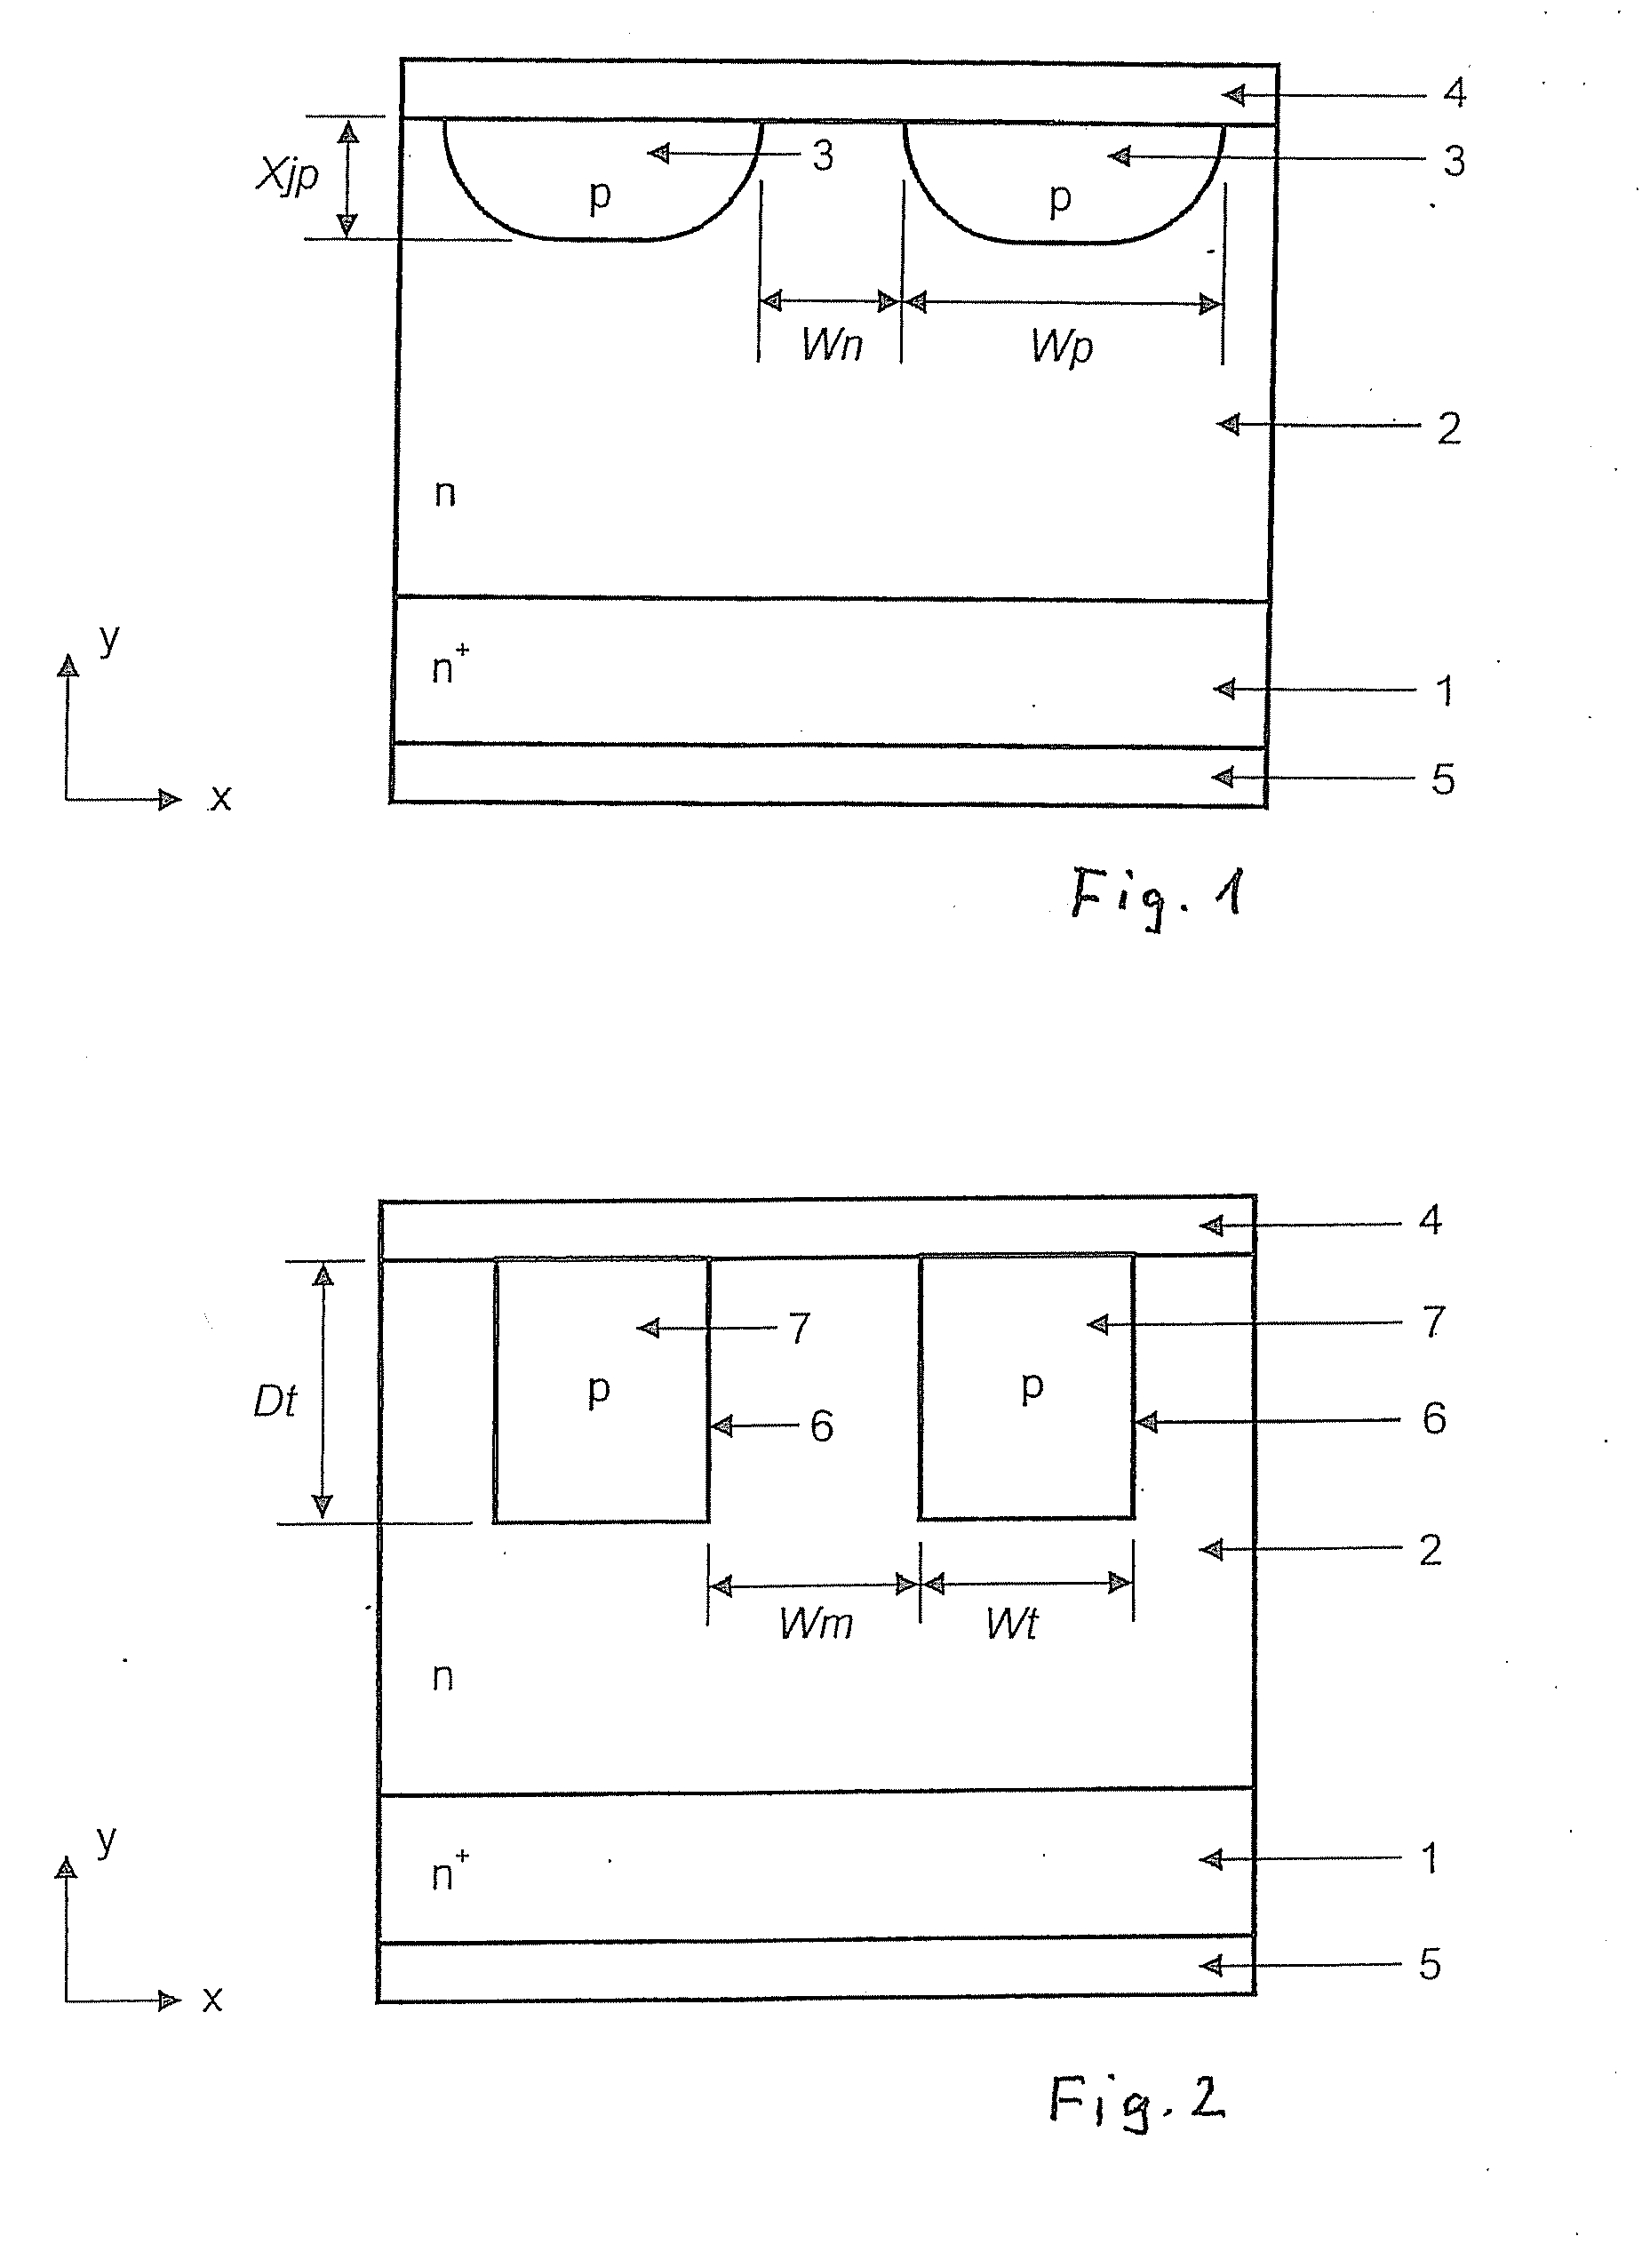 Schottky diode having a substrate p-n diode